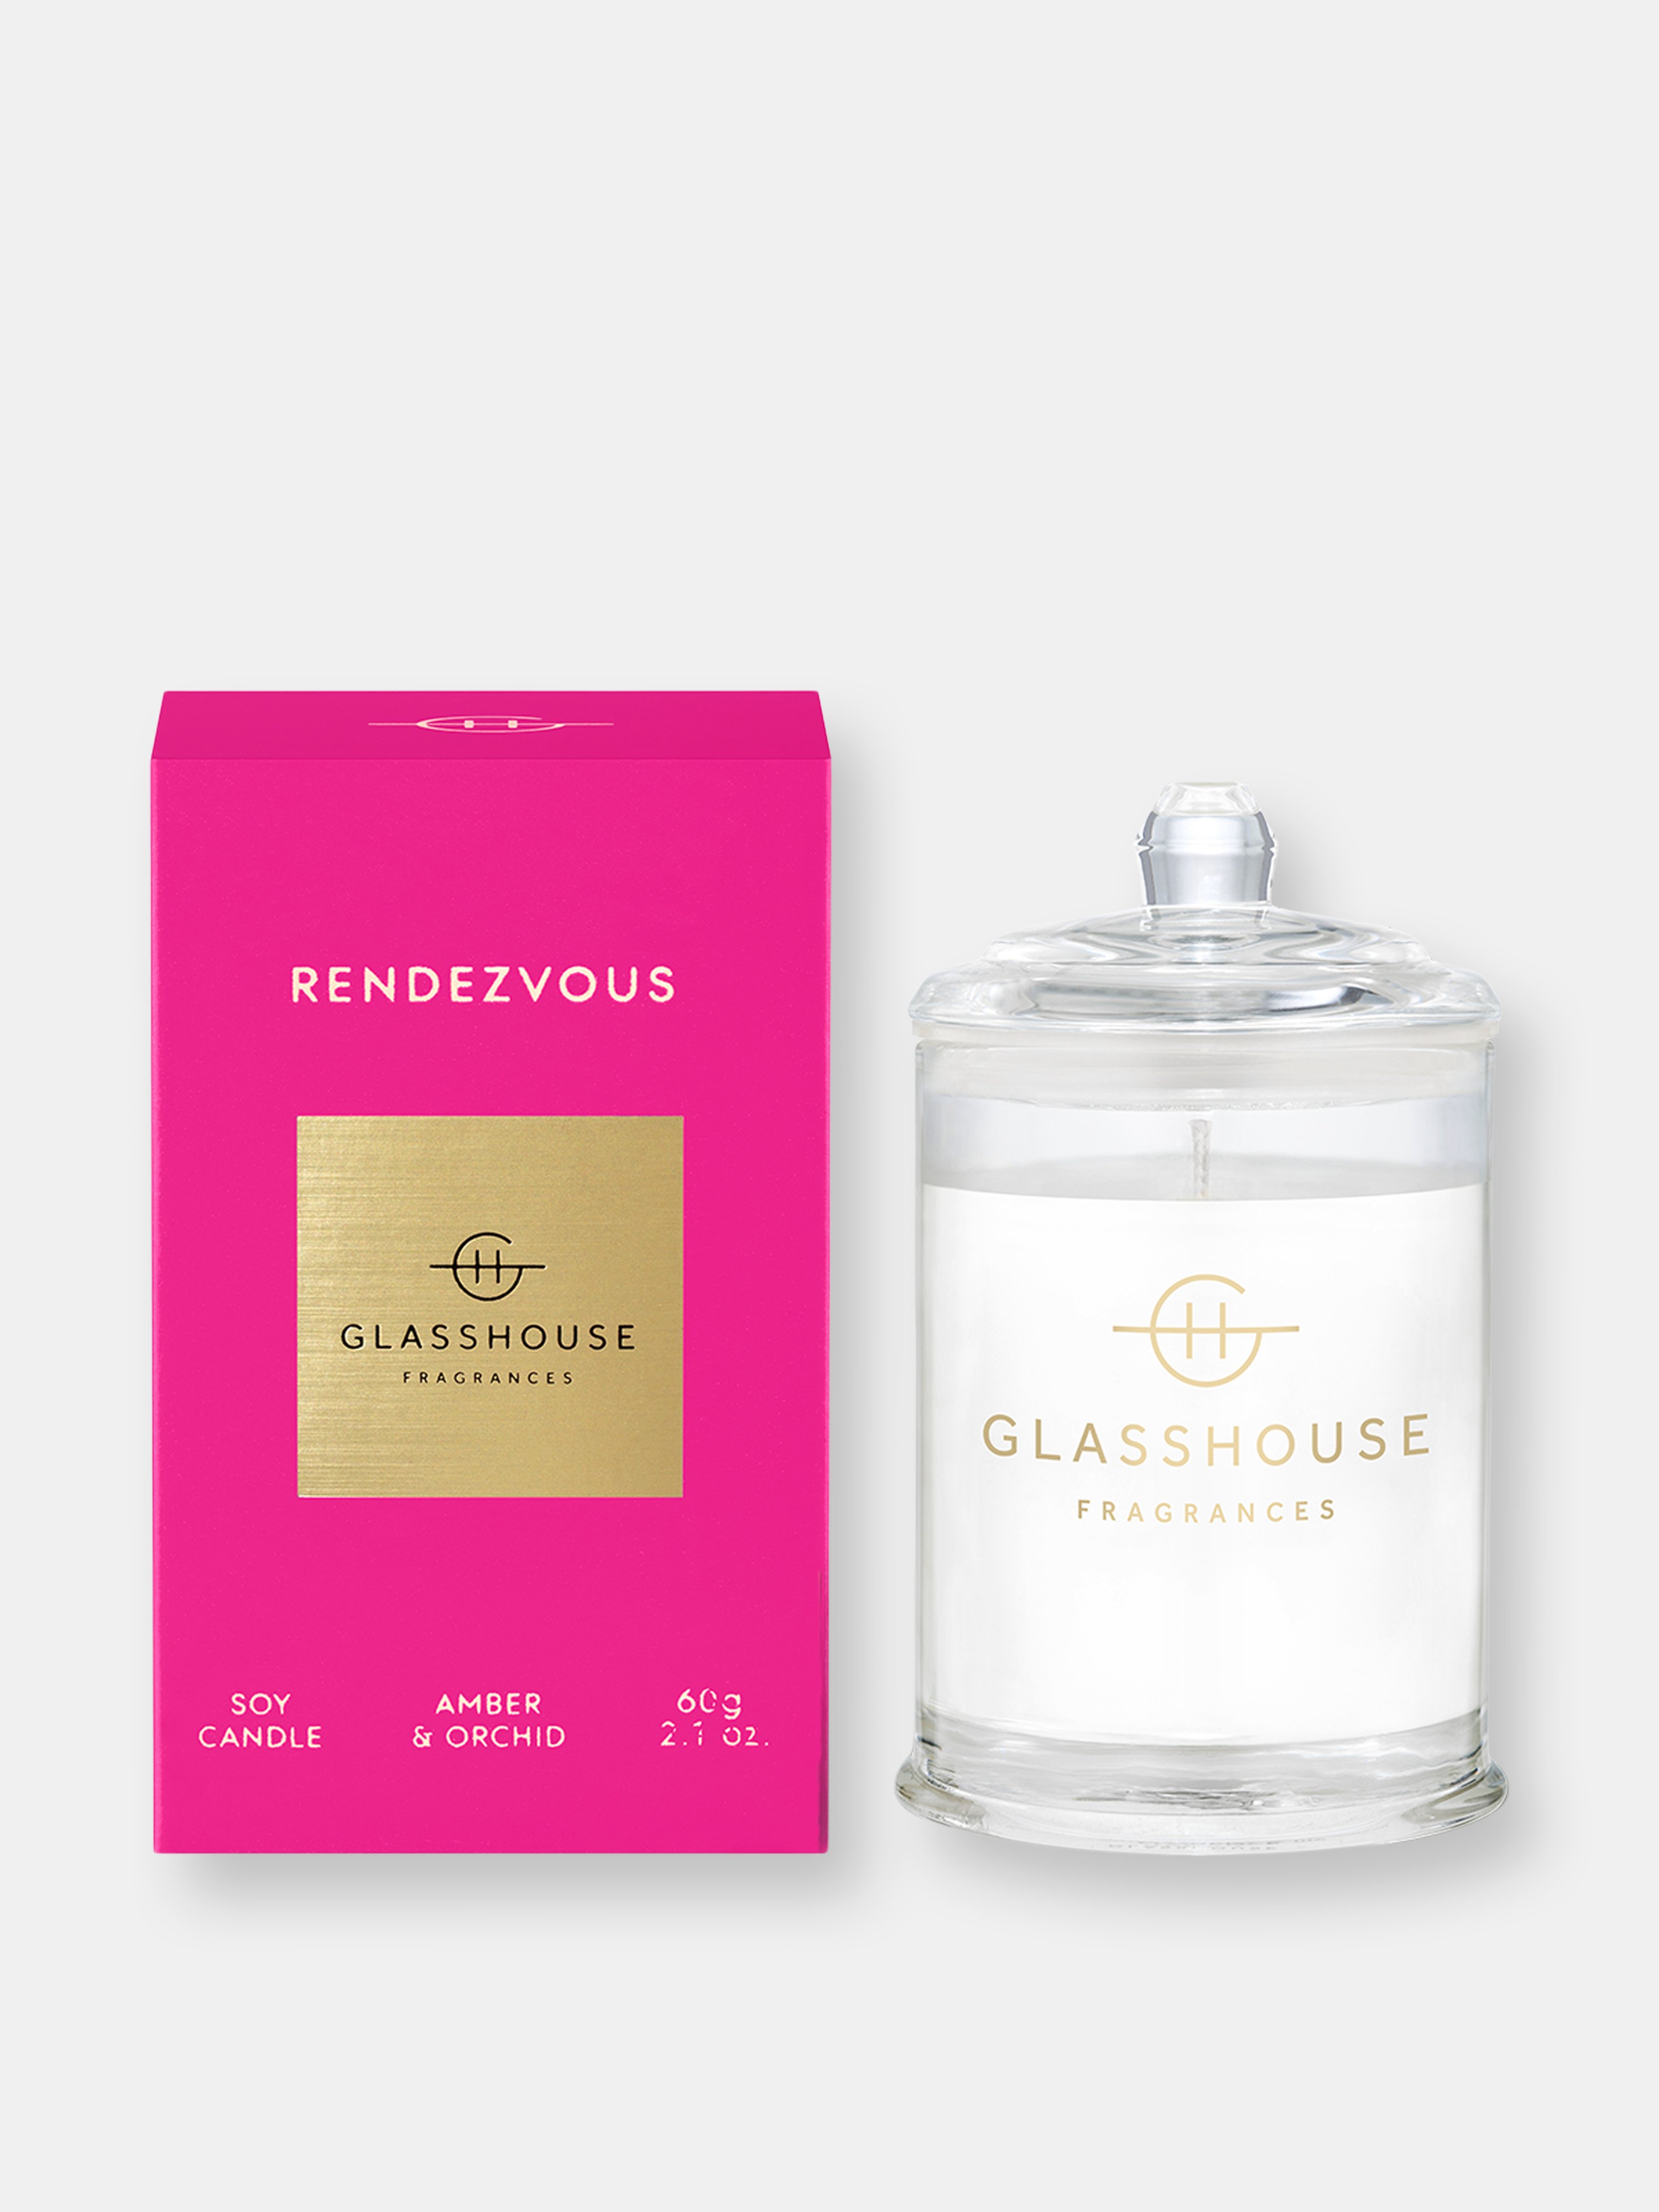 GLASSHOUSE FRAGRANCES GLASSHOUSE FRAGRANCES RENDEZVOUS 2.1OZ TRIPLE SCENTED SOY CANDLE